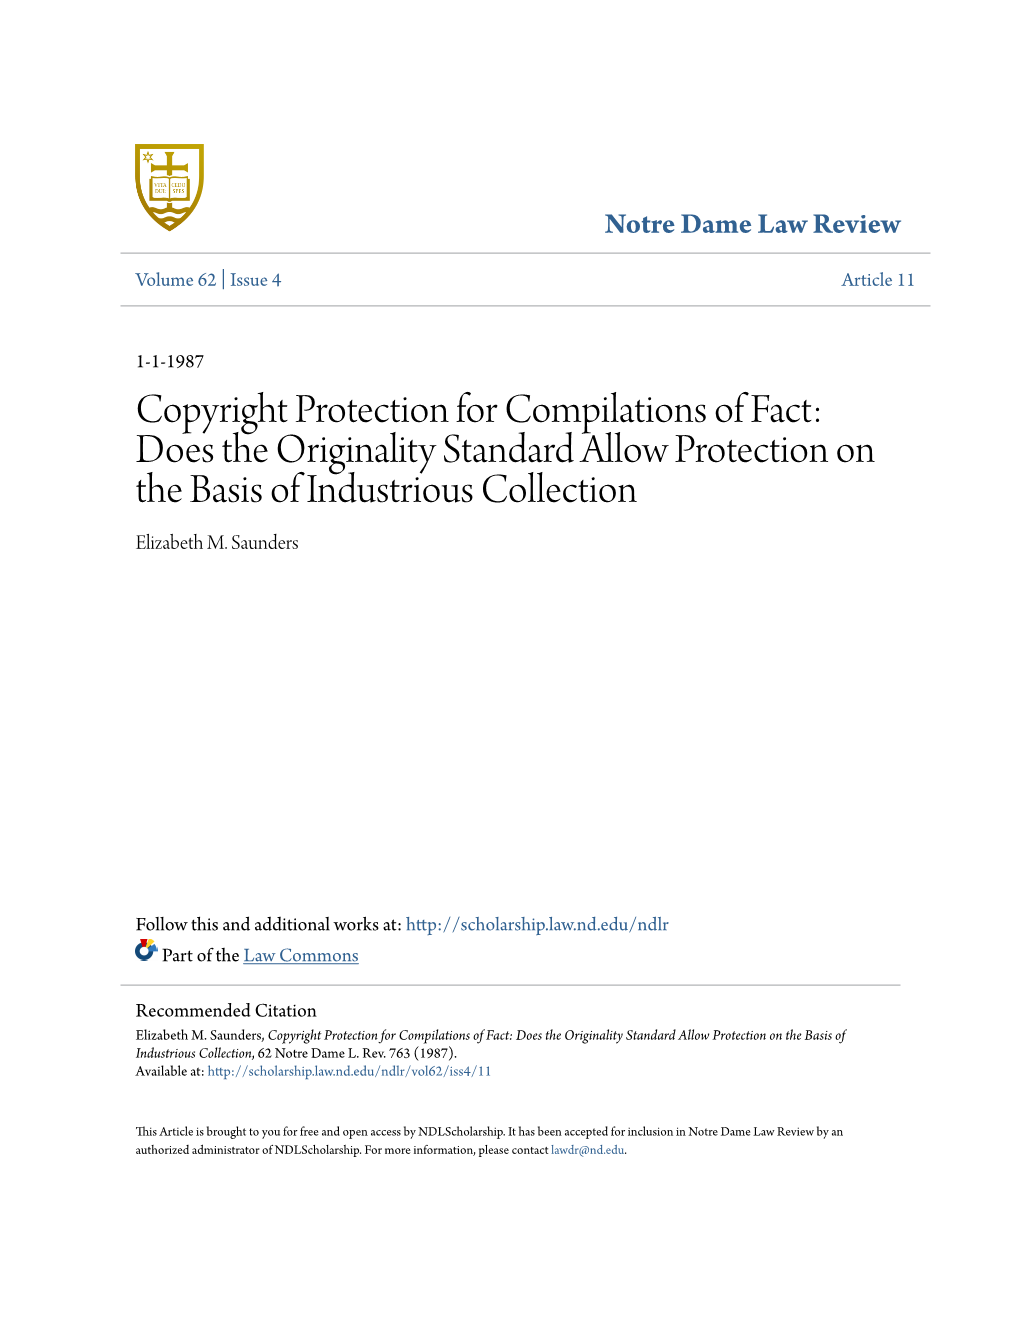 Copyright Protection for Compilations of Fact: Does the Originality Standard Allow Protection on the Basis of Industrious Collection Elizabeth M